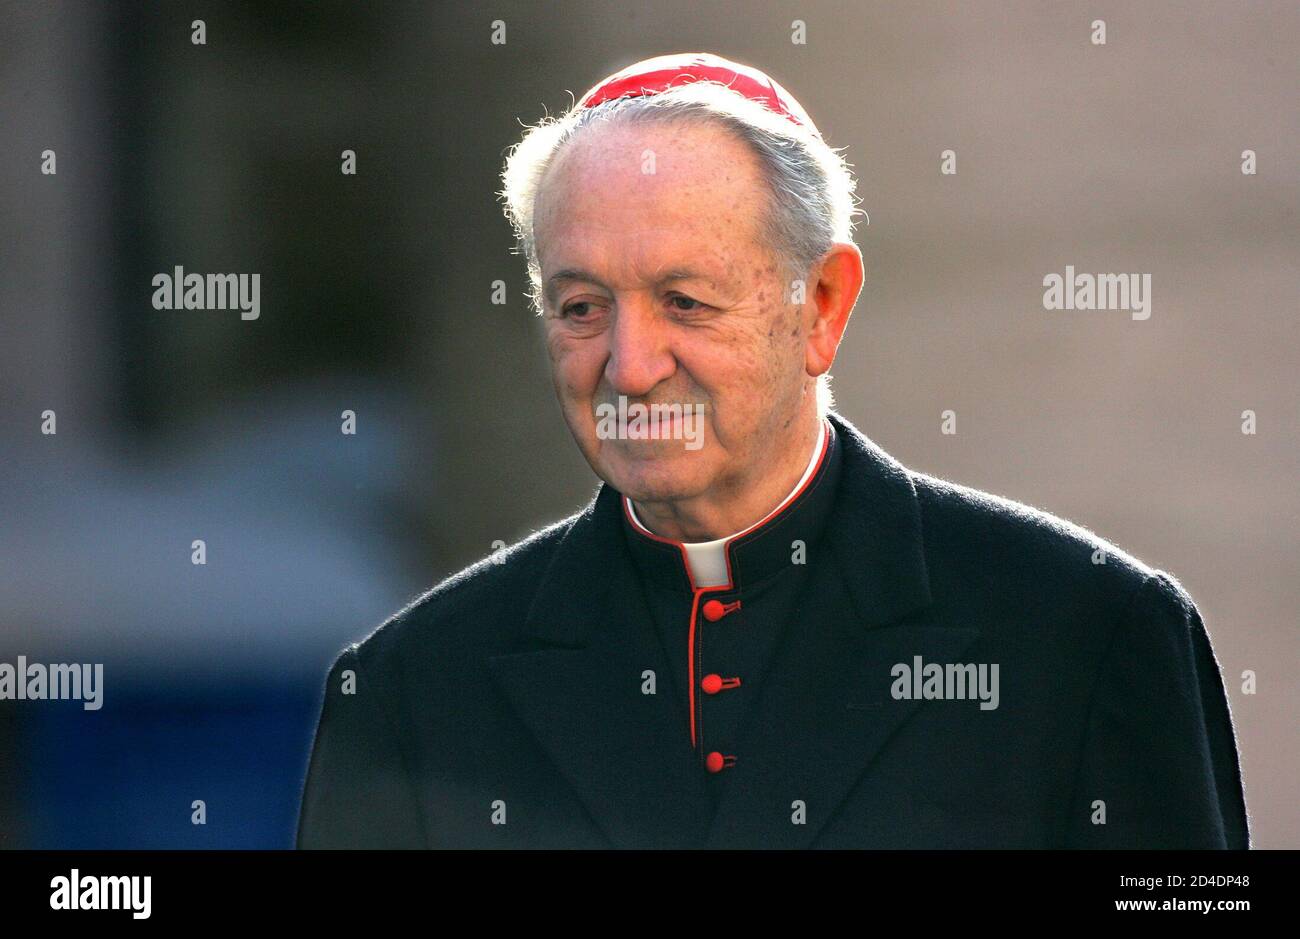 Cardinal Serafim de Araujo Fernandes of Brazil arrives for the general  congregation meeting in the Vatican April 14, 2005. [Roman Catholicism's  conclave to elect a new pope will start next Monday in